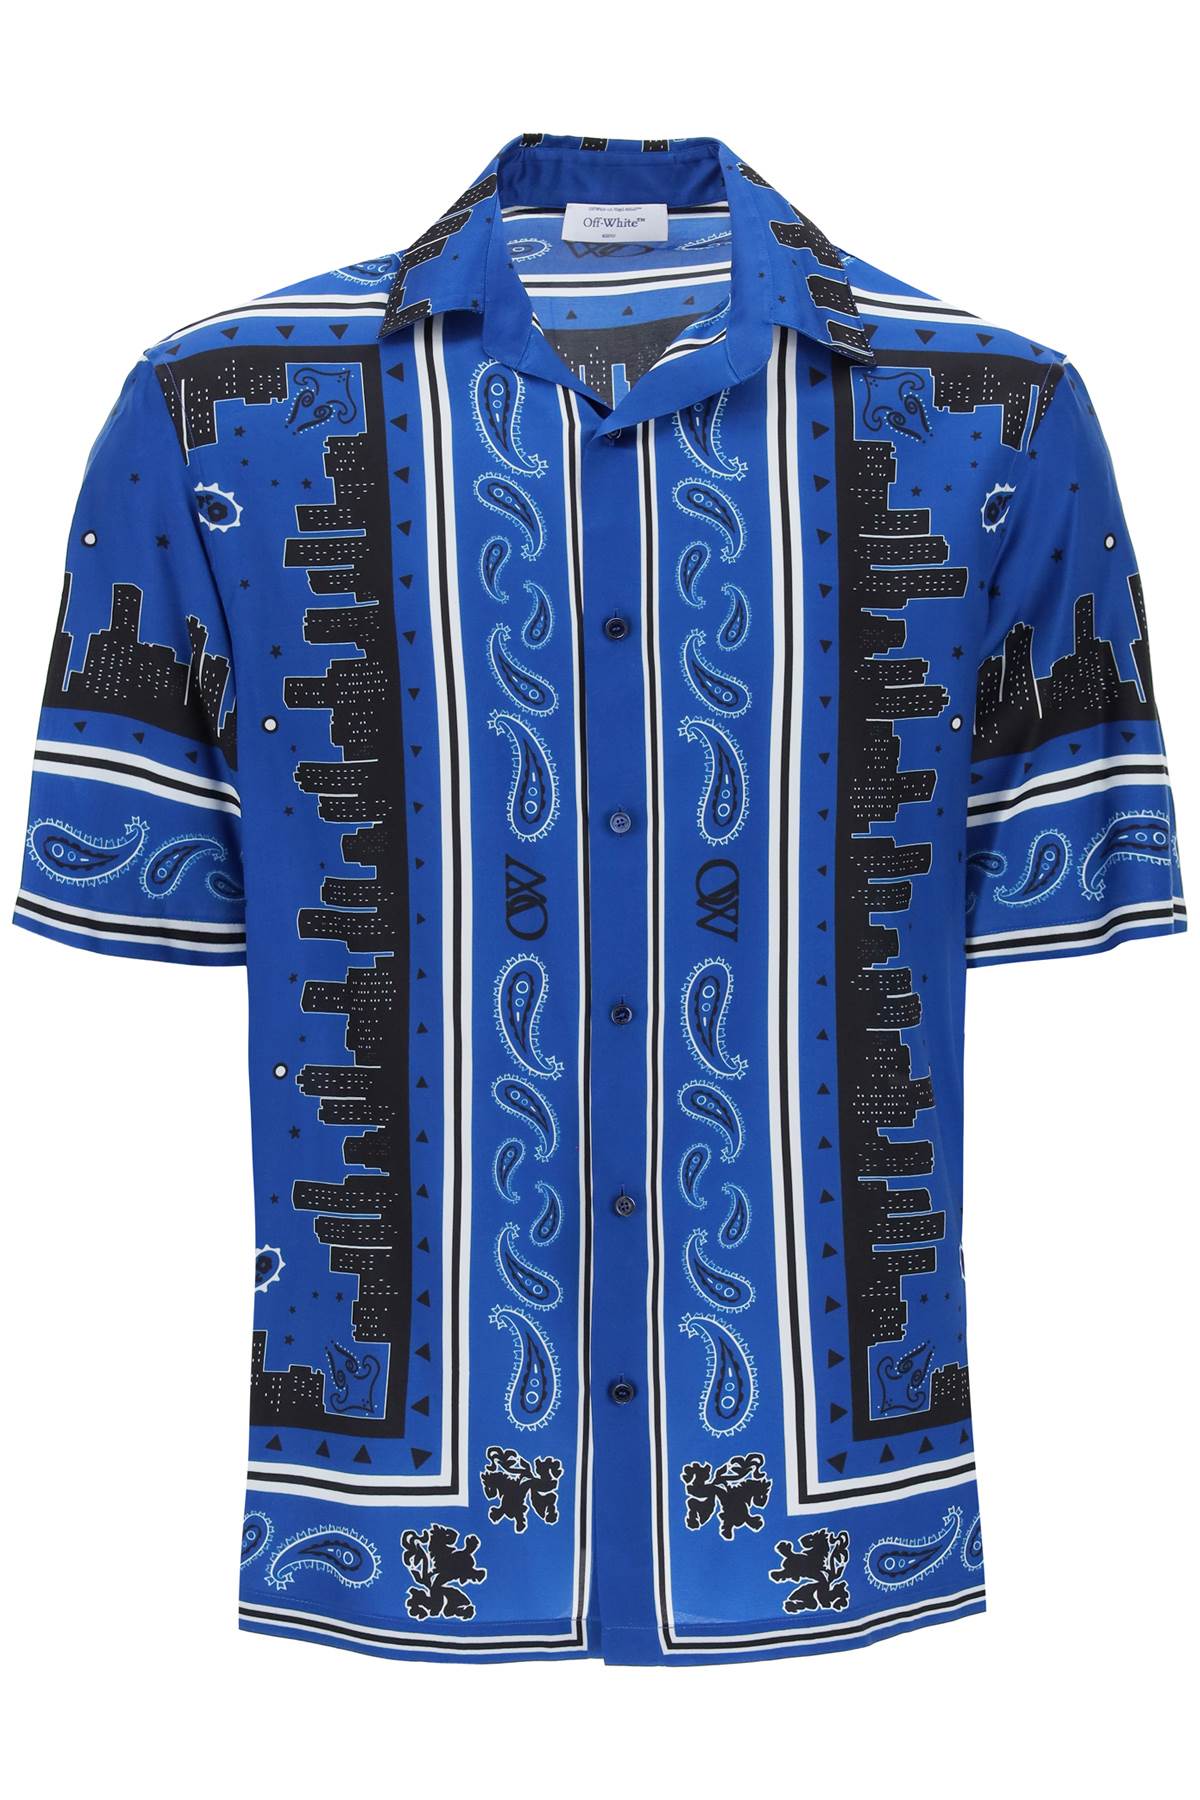 Blue Shirt with Bandana Motif for Men from OFF-WHITE